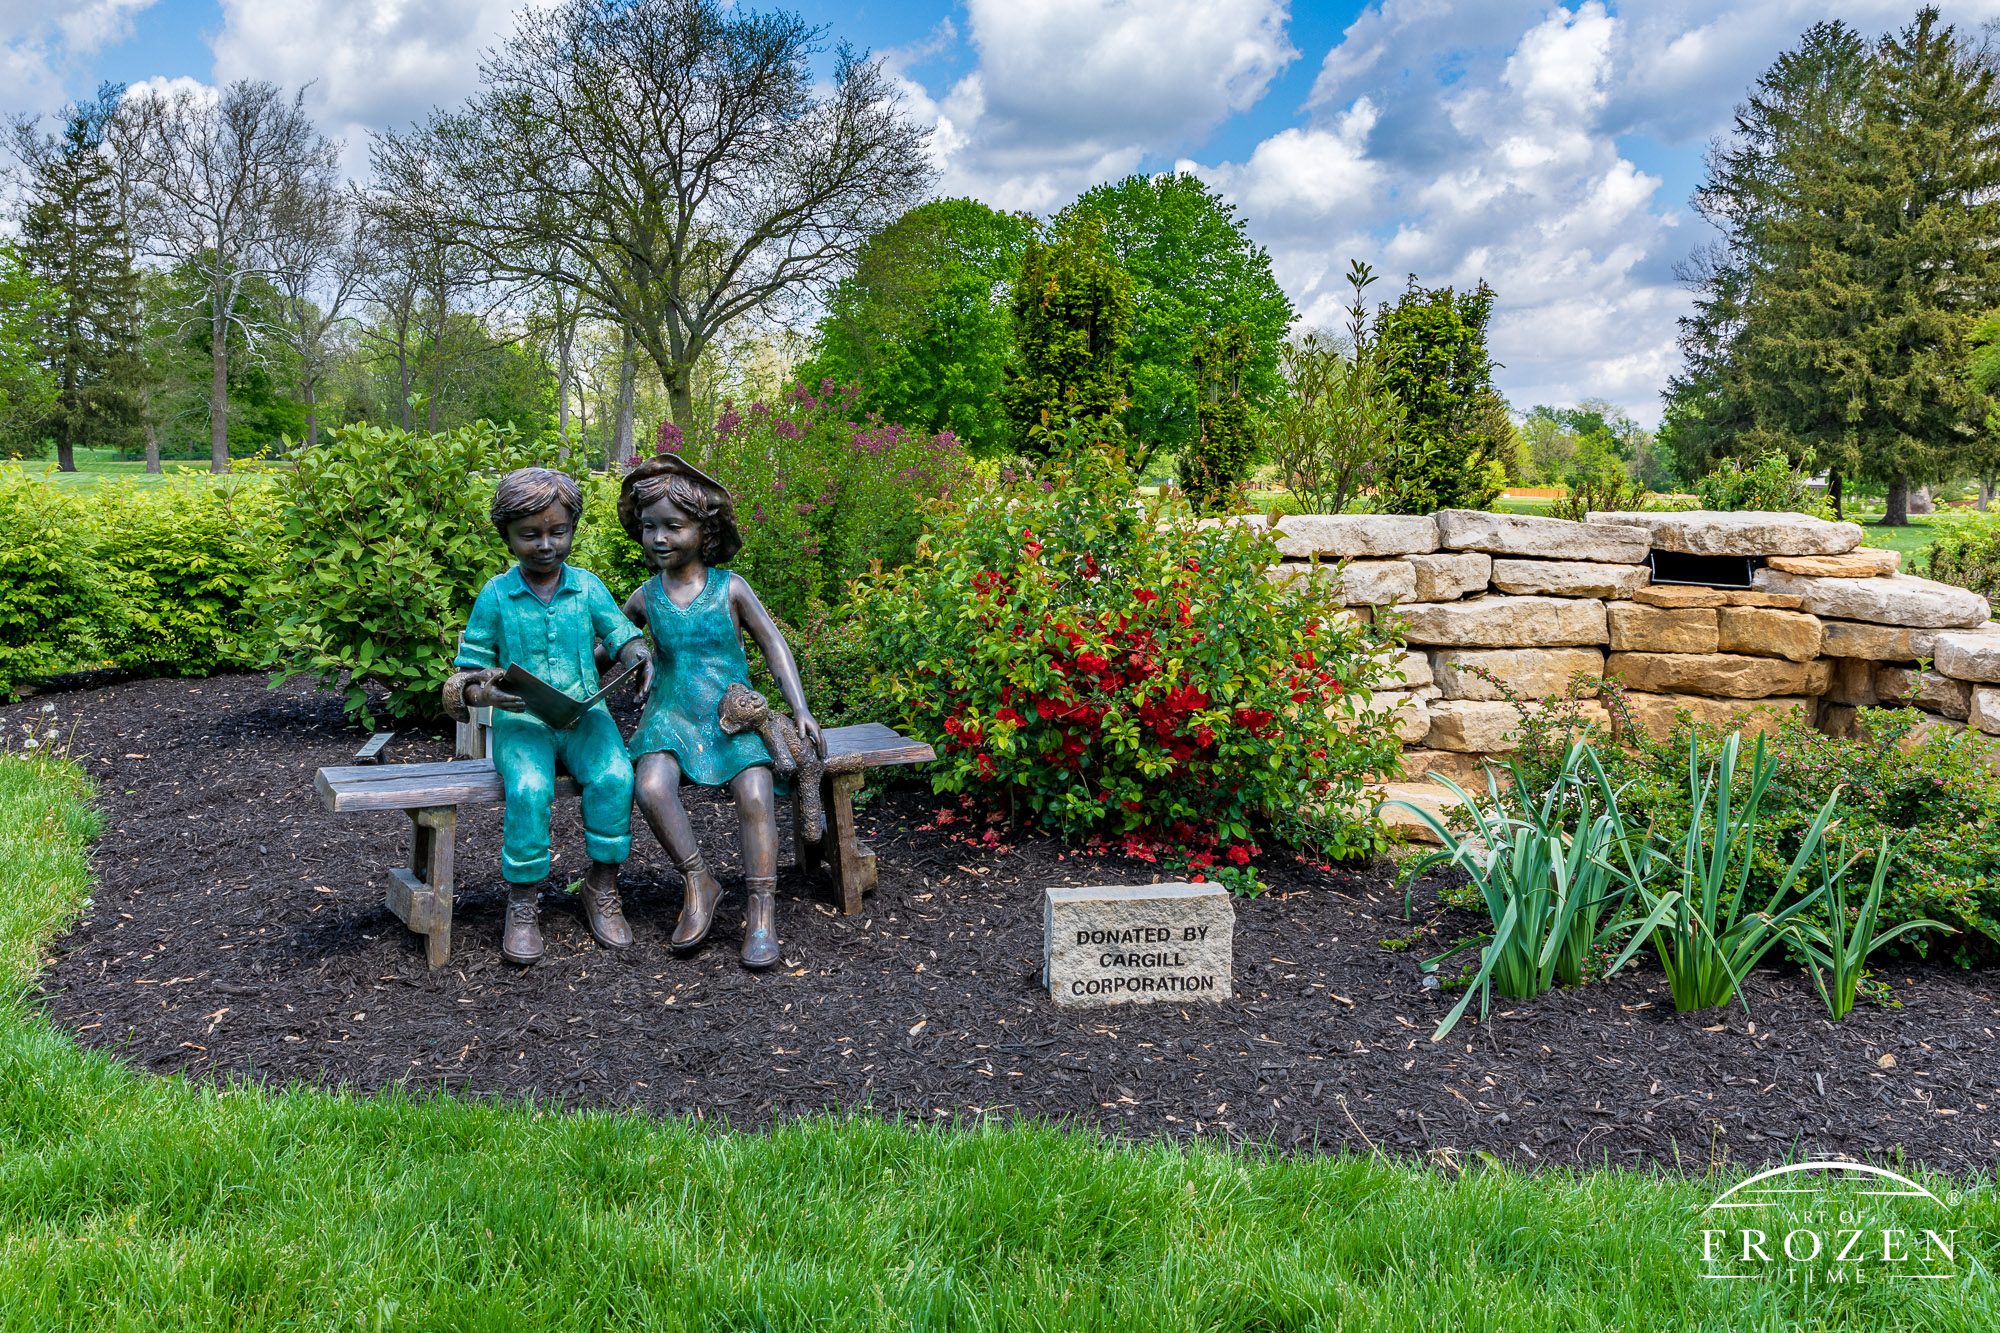 A view of the children’s waterfall feature features this bronze sculpture of a boy and girl reading a book while sitting on a bench